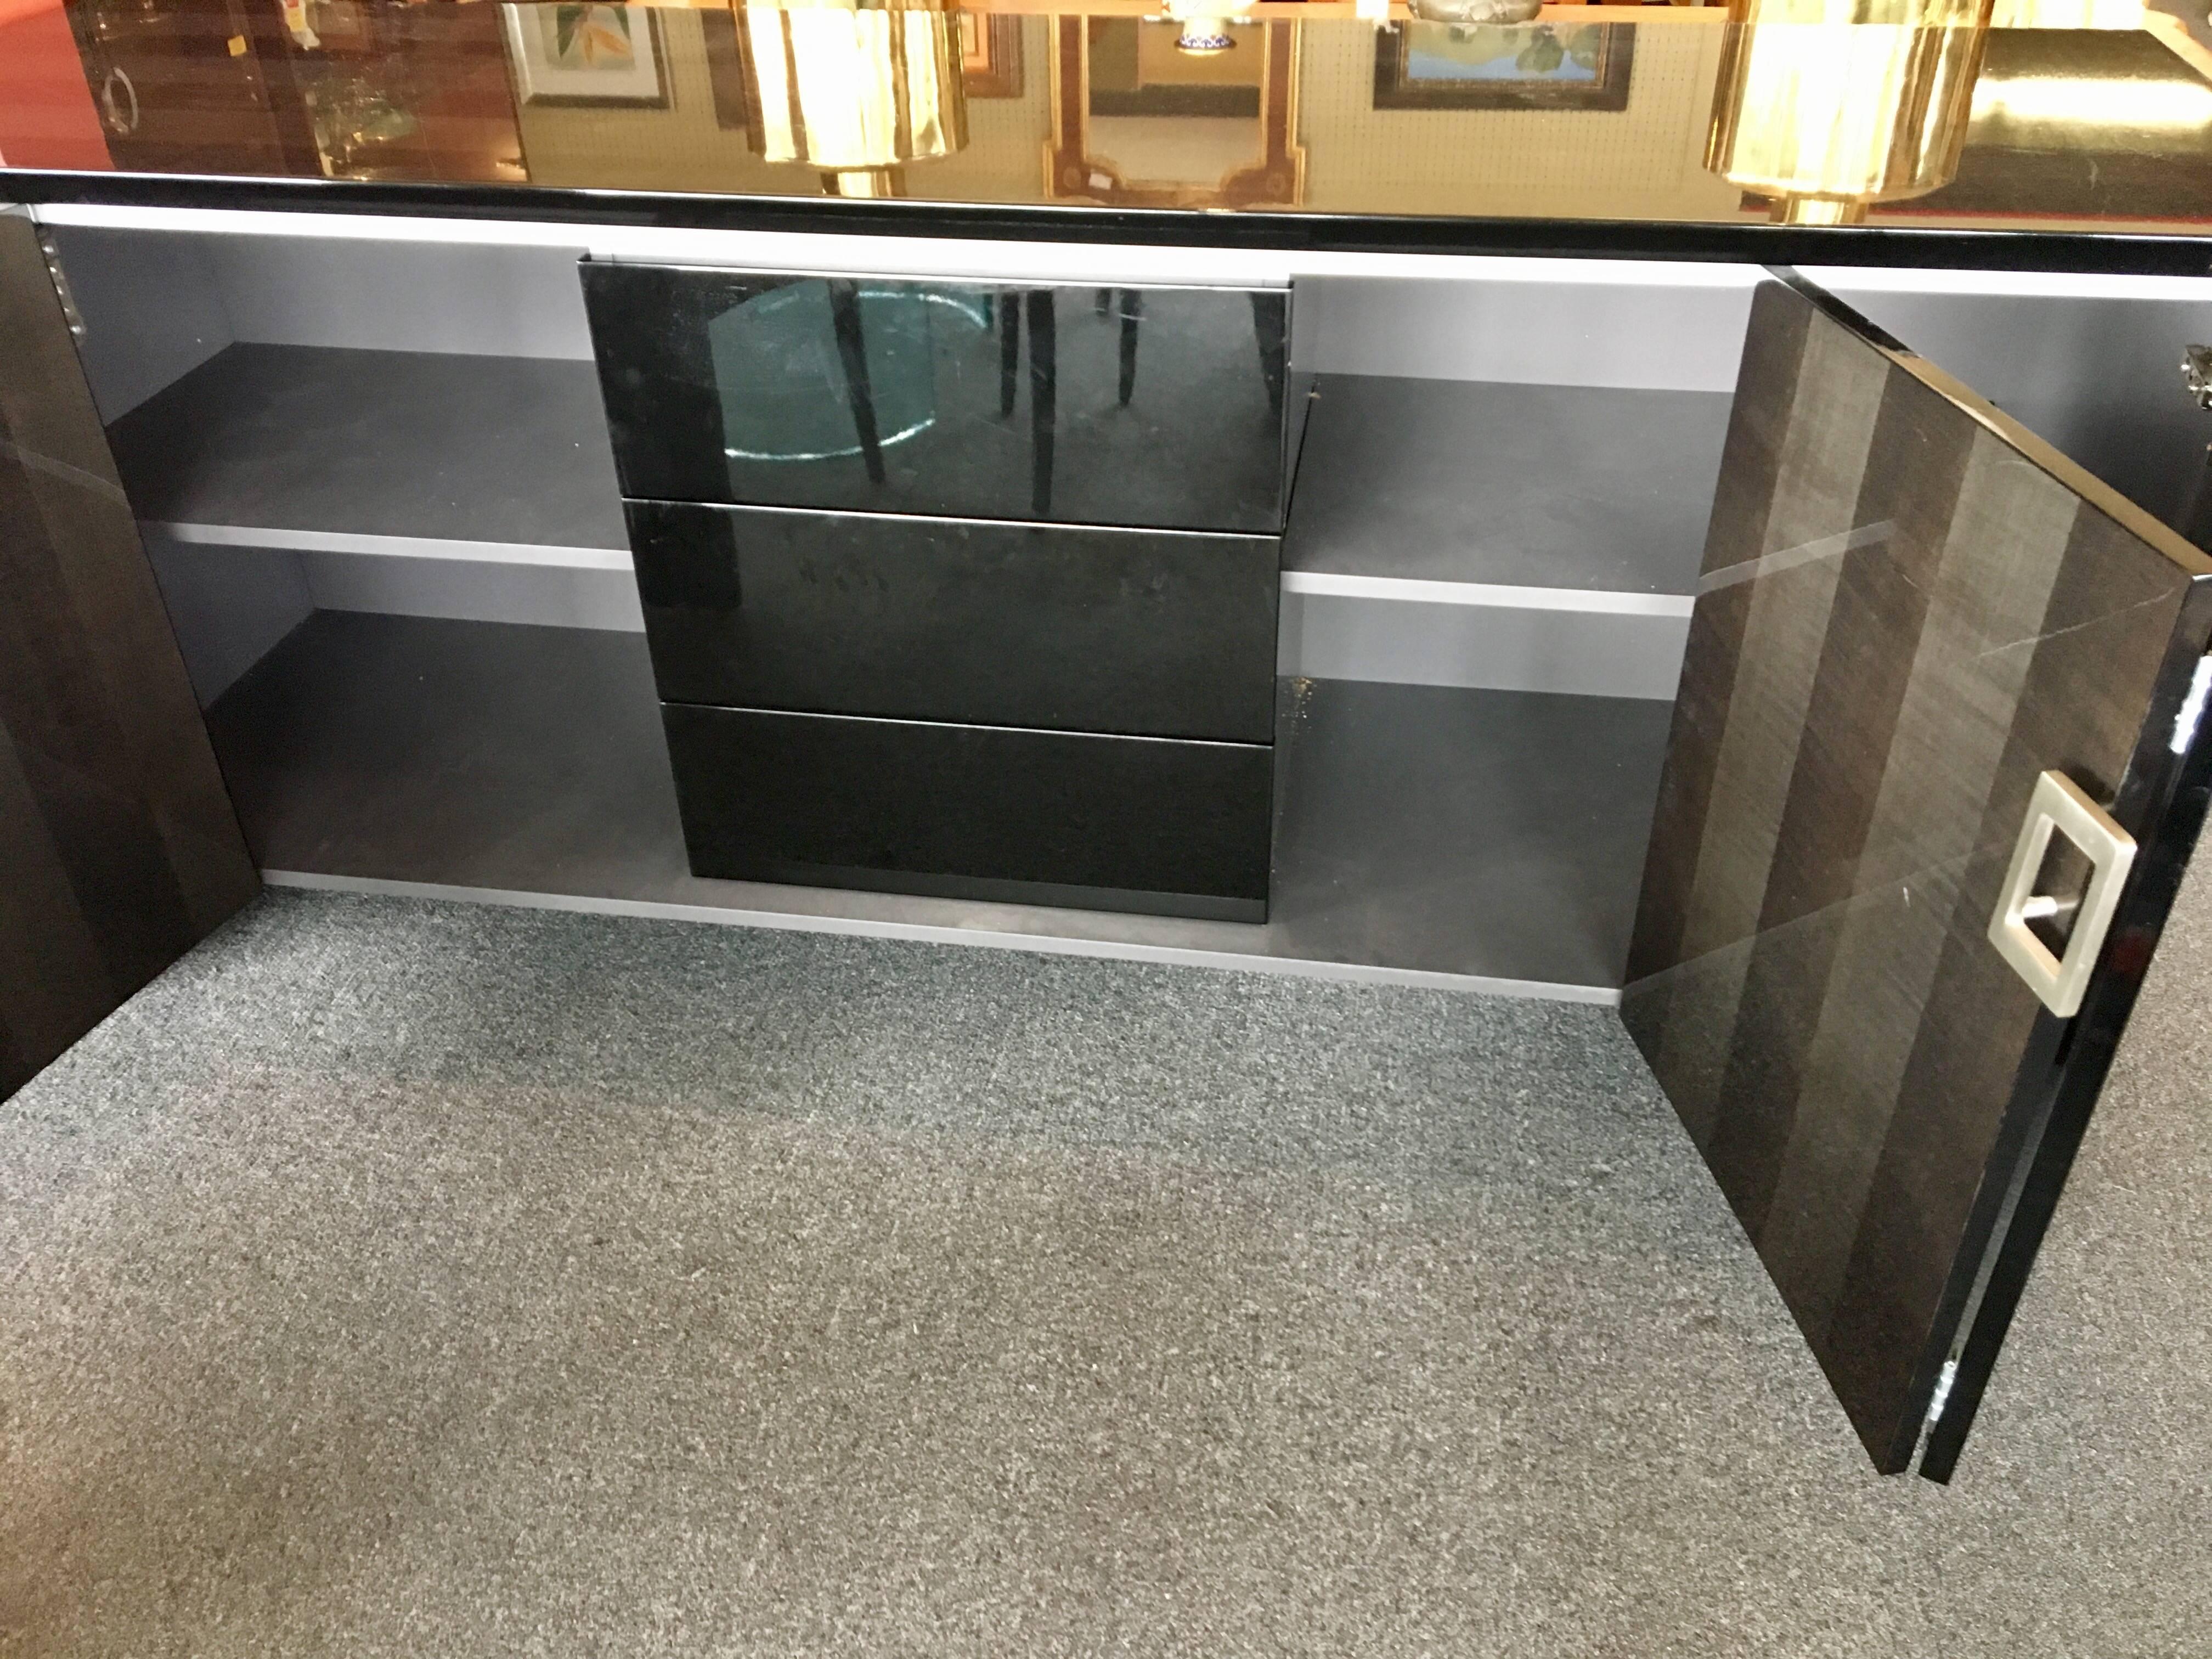 Post-Modern Postmodern Italian Credenza in Two Tone Gloss Lacquer Finish